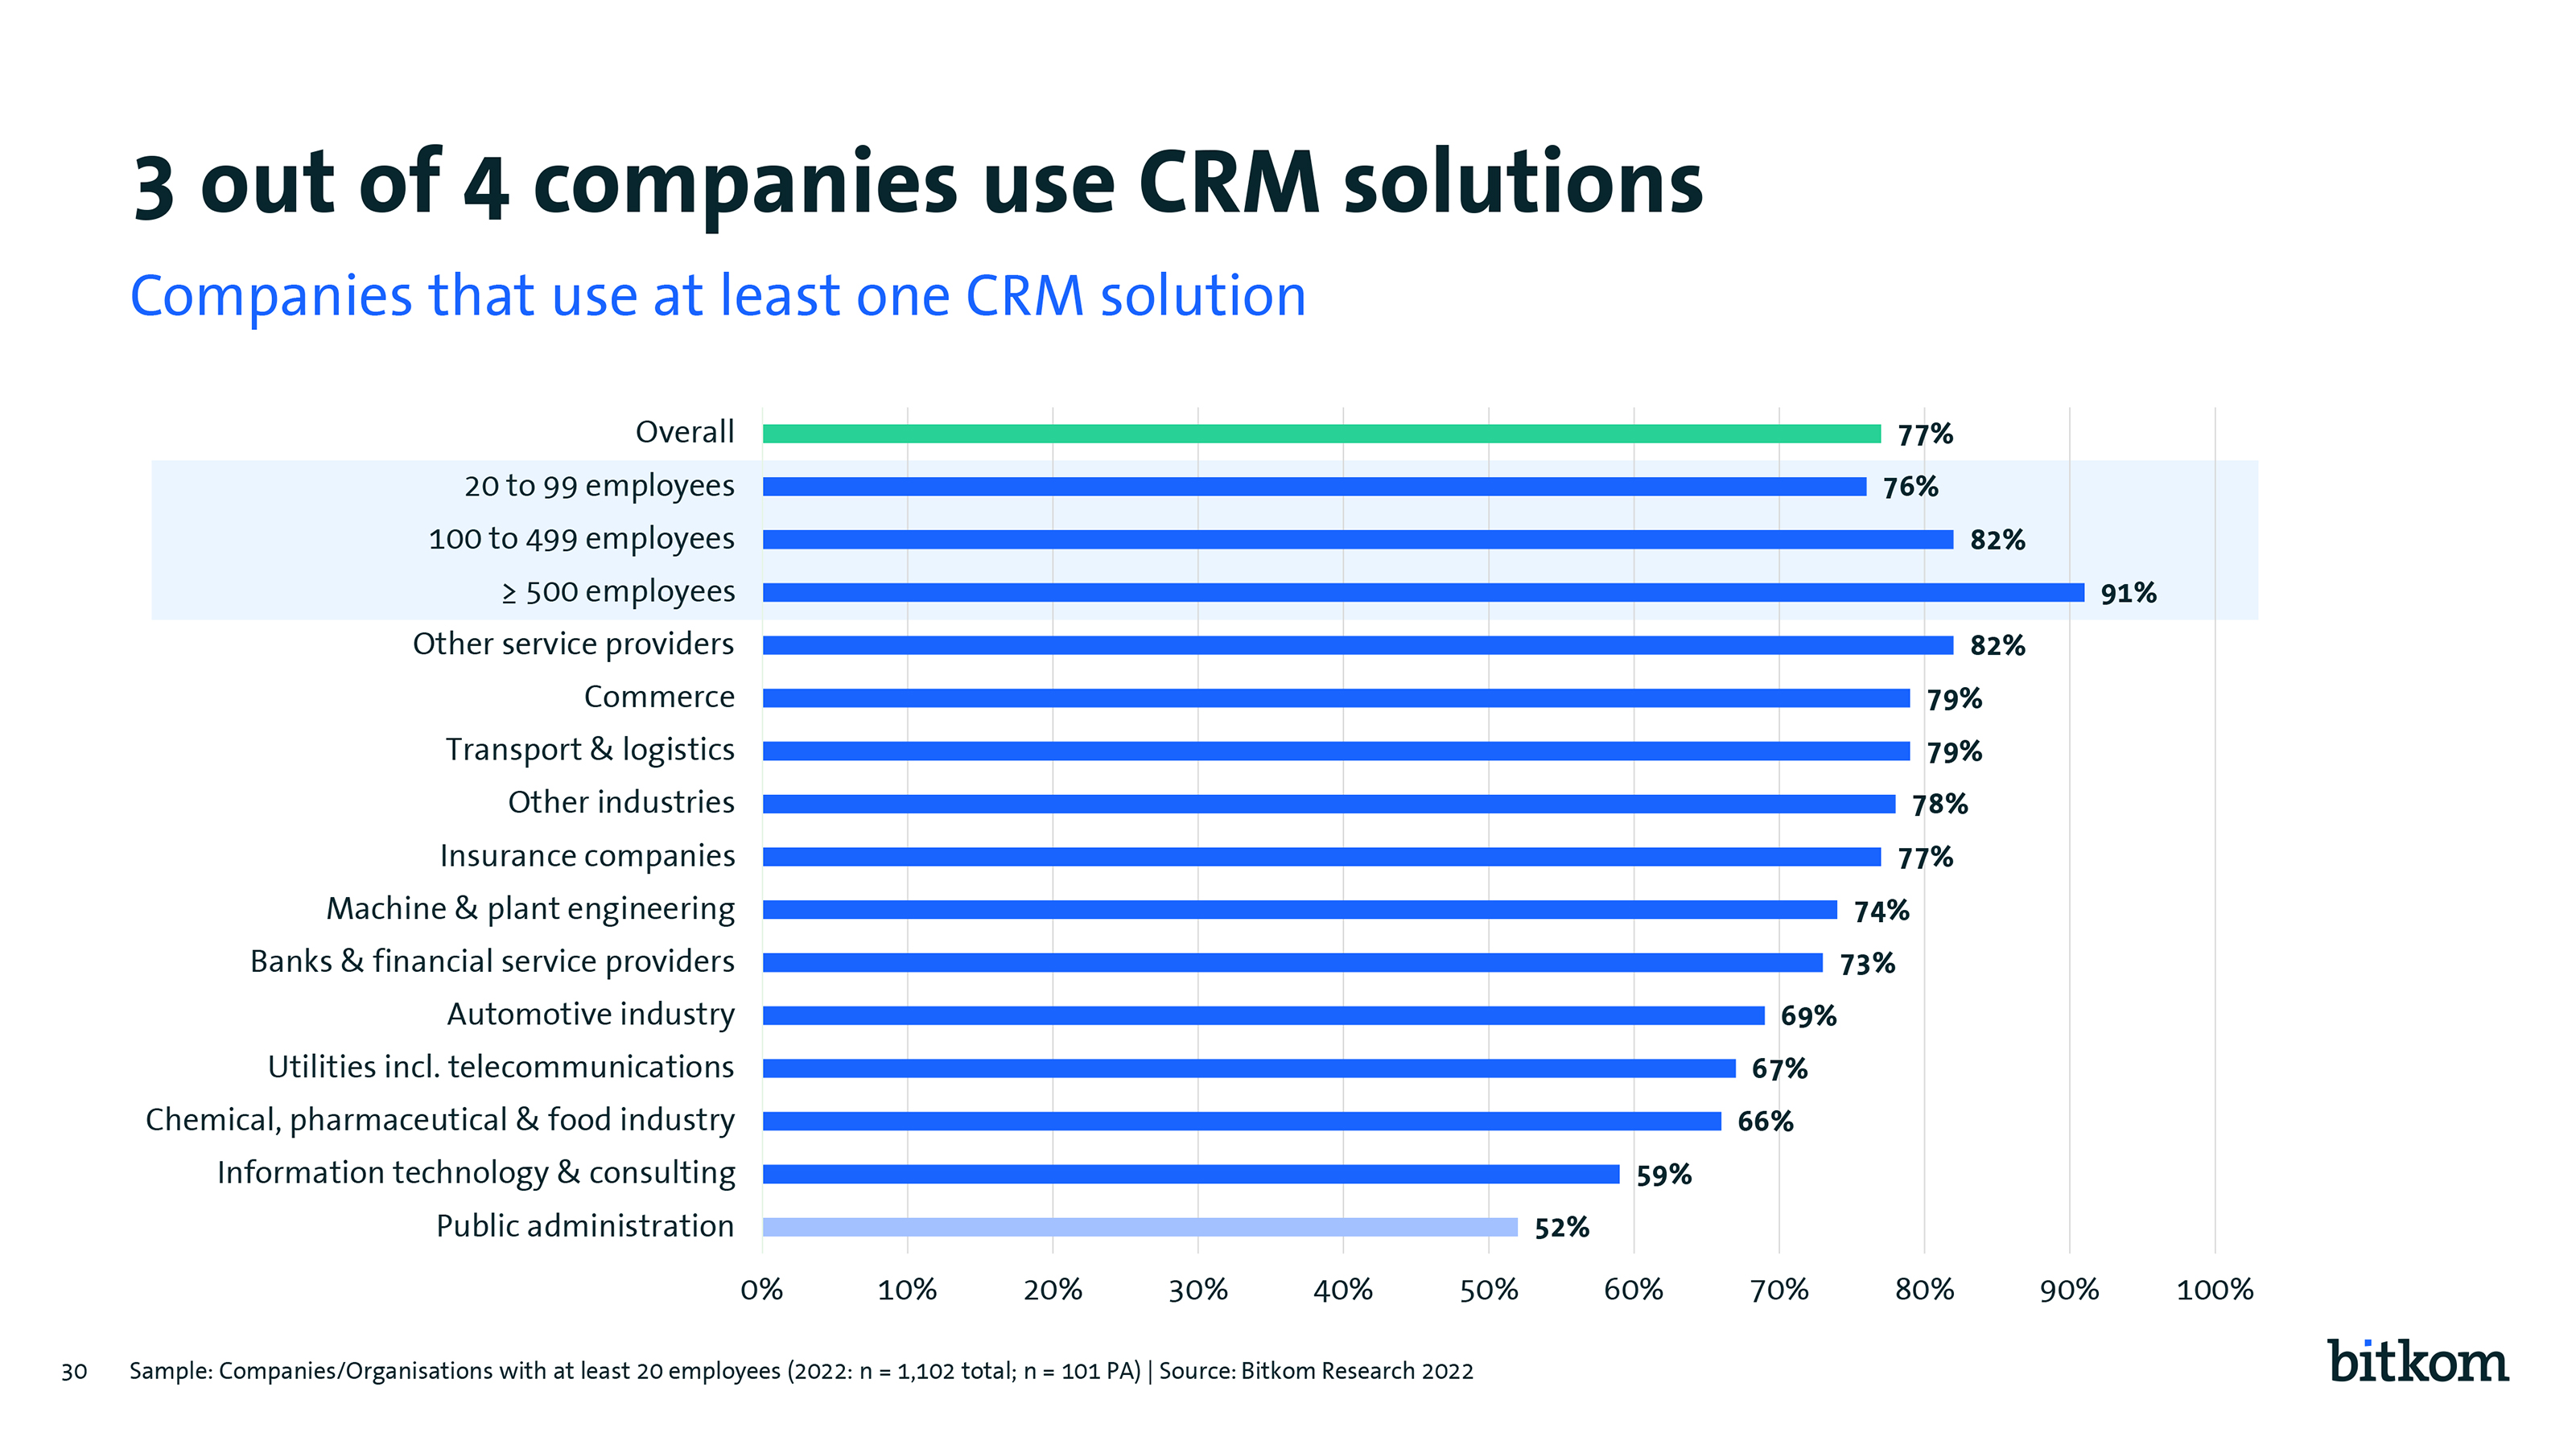 3 out of 4 companies use crm solutions